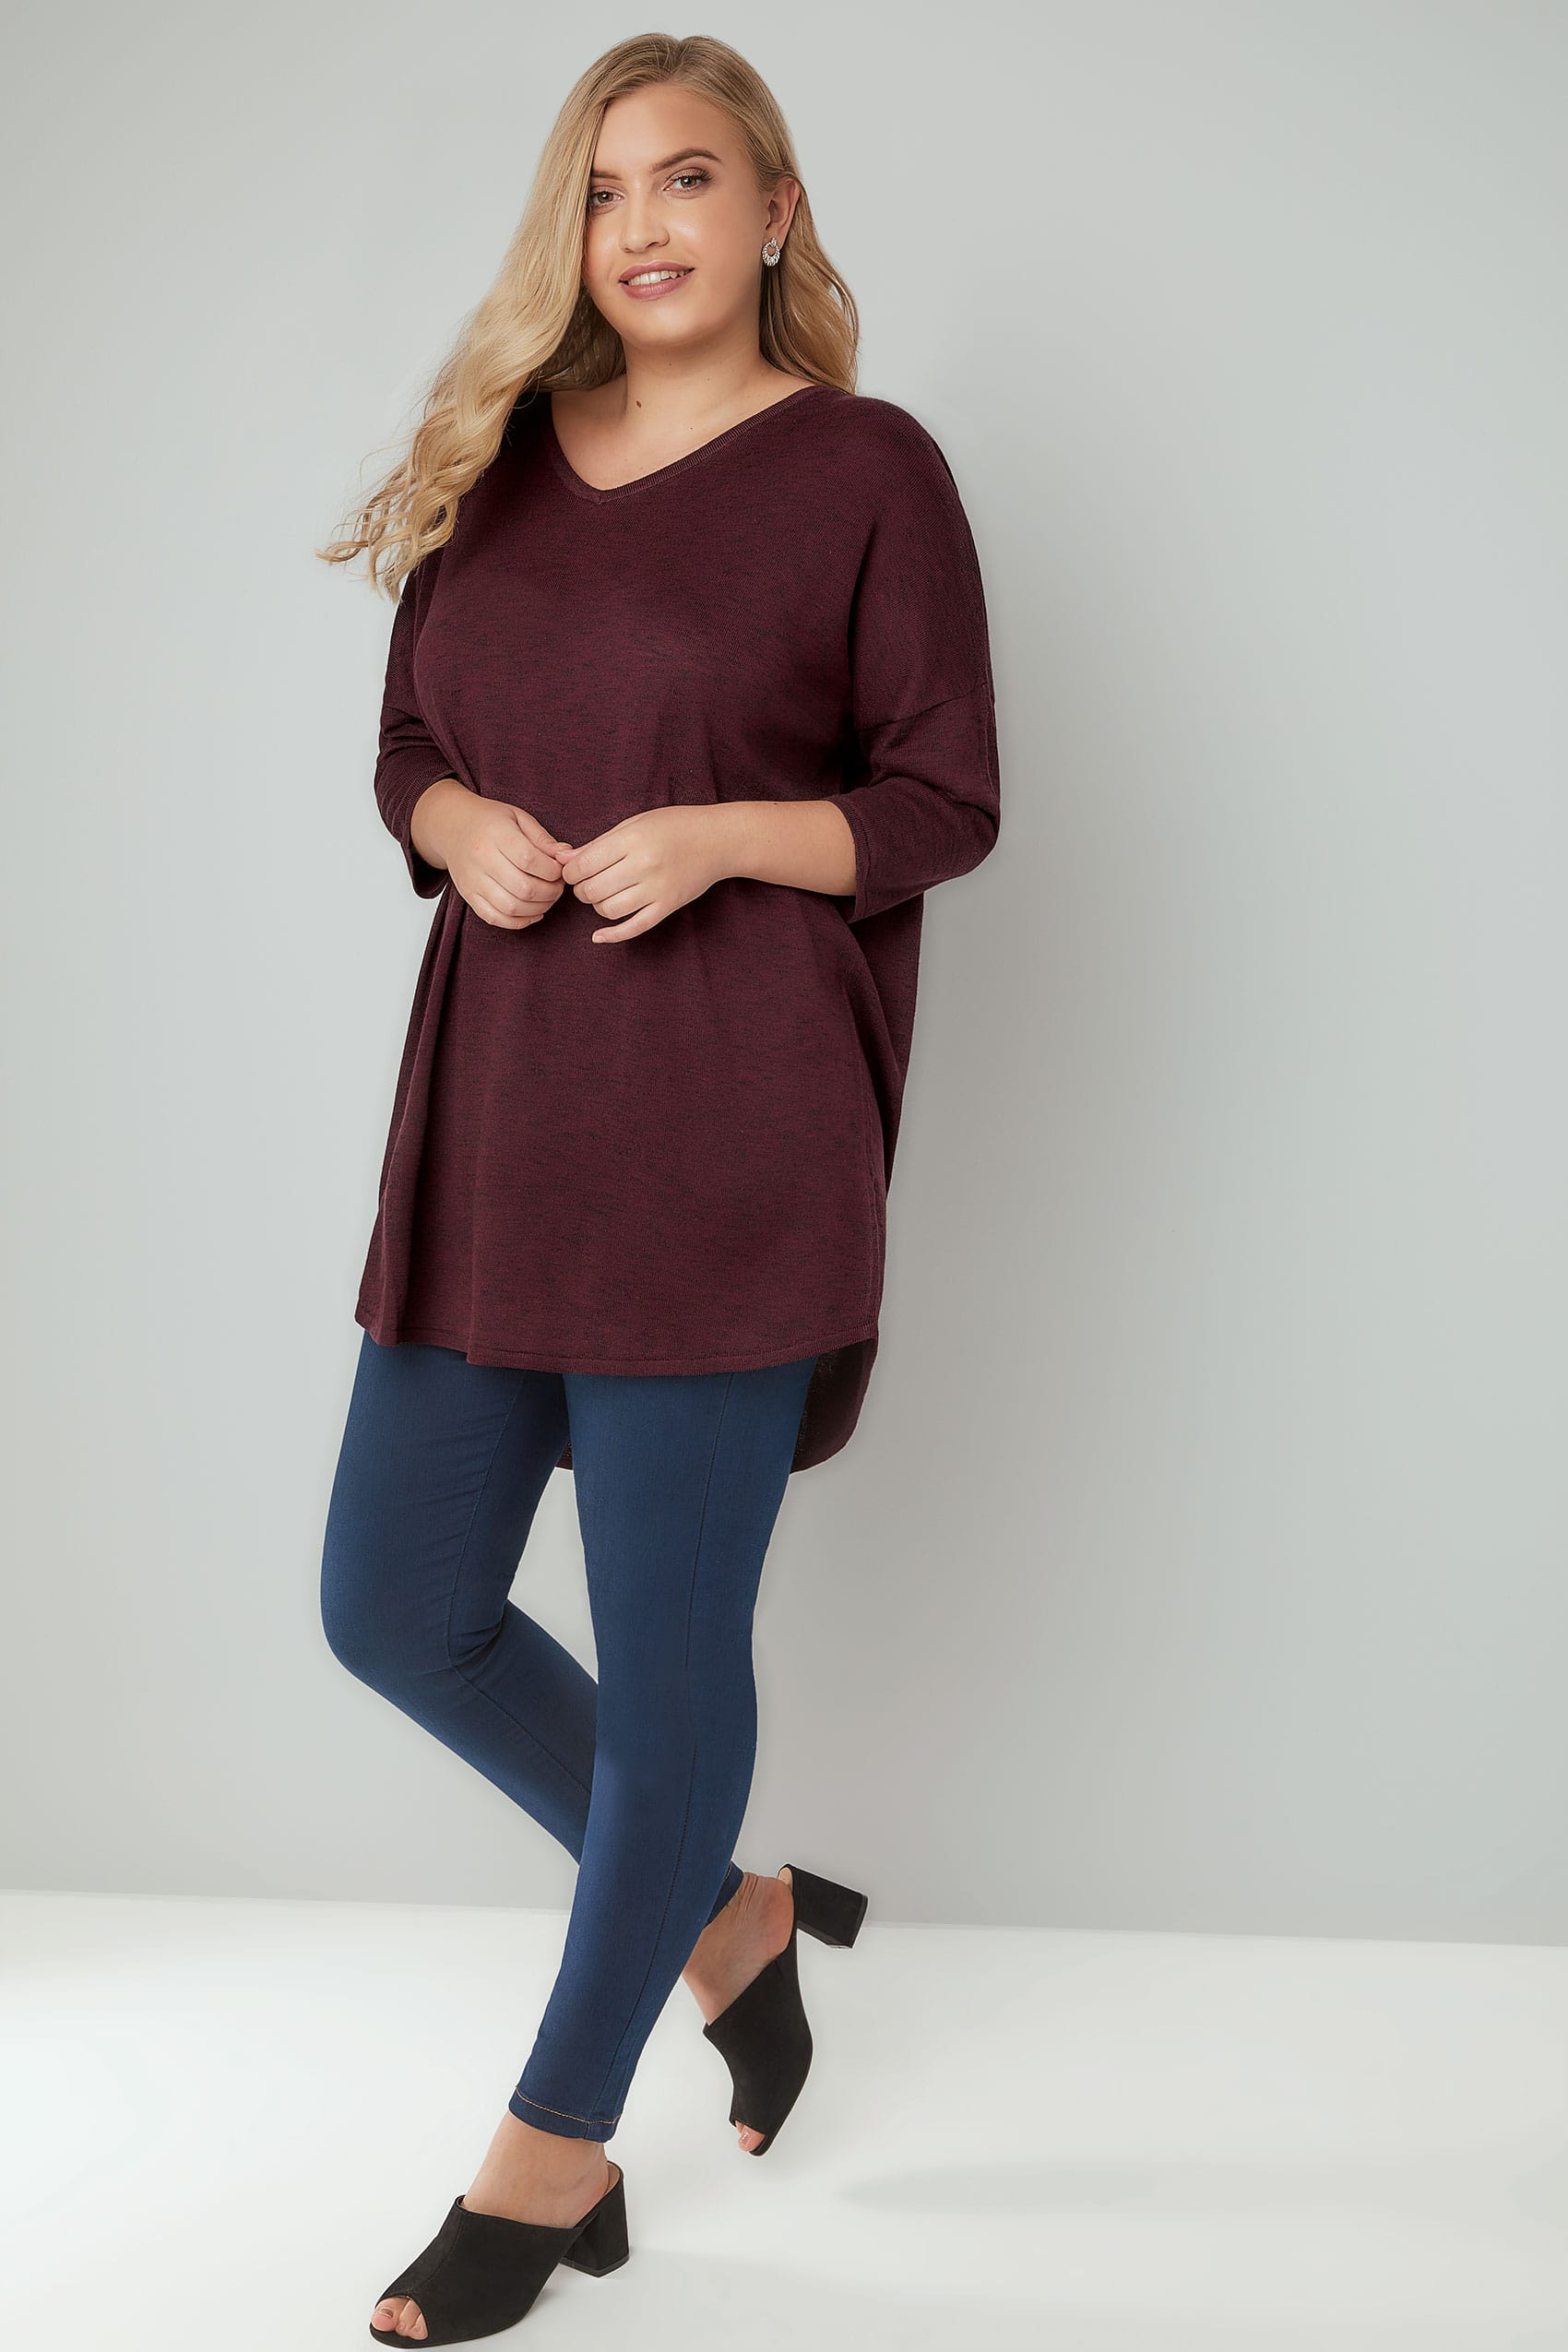 Burgundy Longline Knitted Top With Cross Over Straps, Plus size 16 to 36